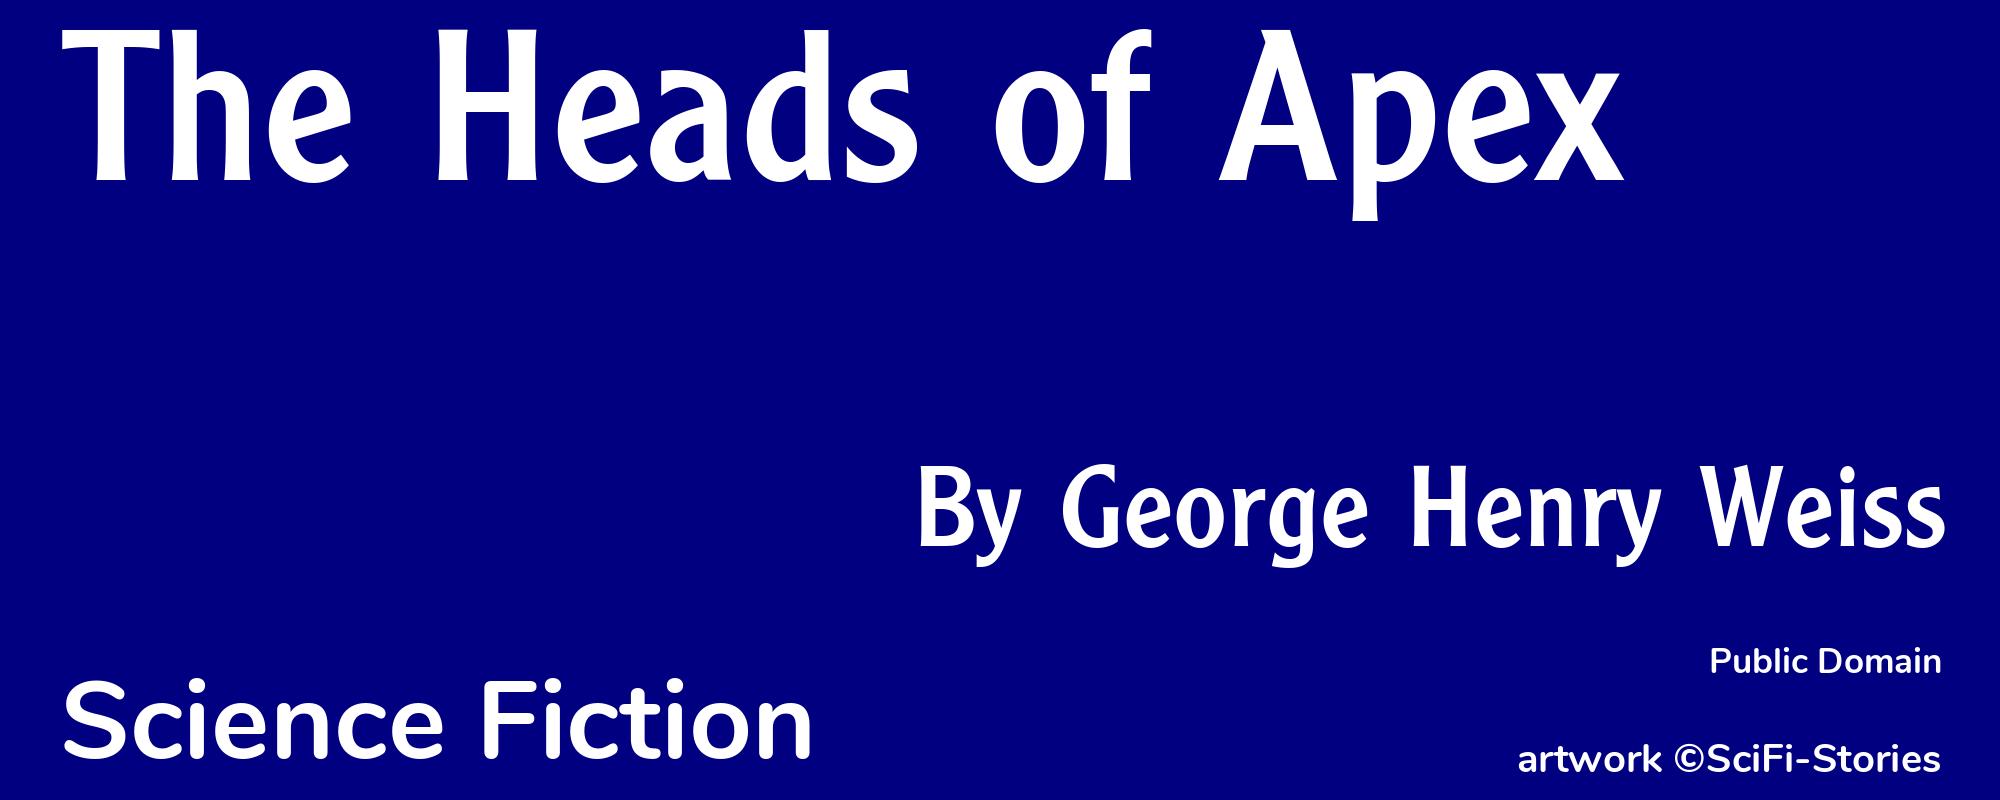 The Heads of Apex - Cover